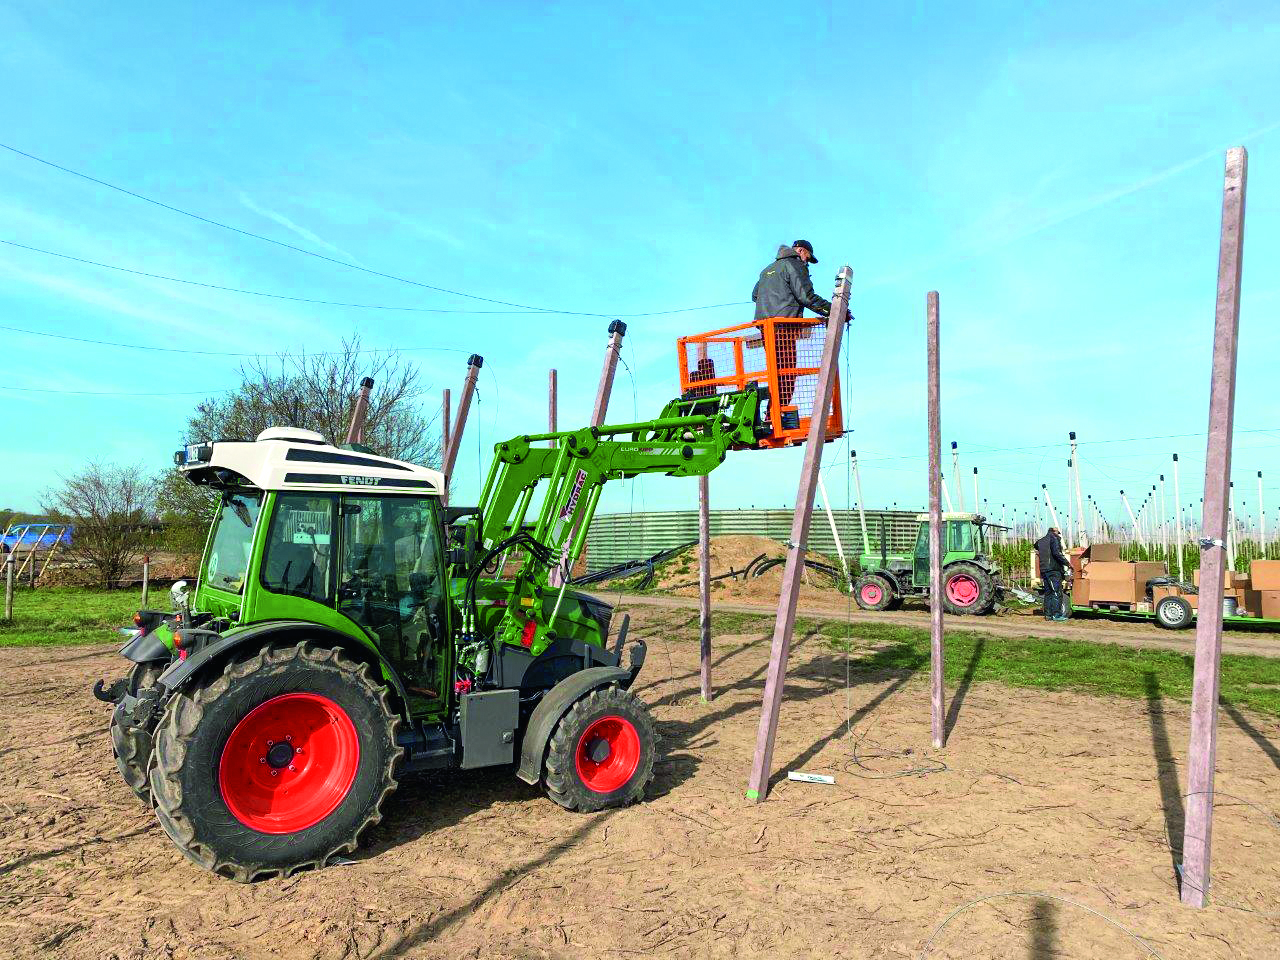 Fendt e100 Vario in use for a Fraunhofer research project on